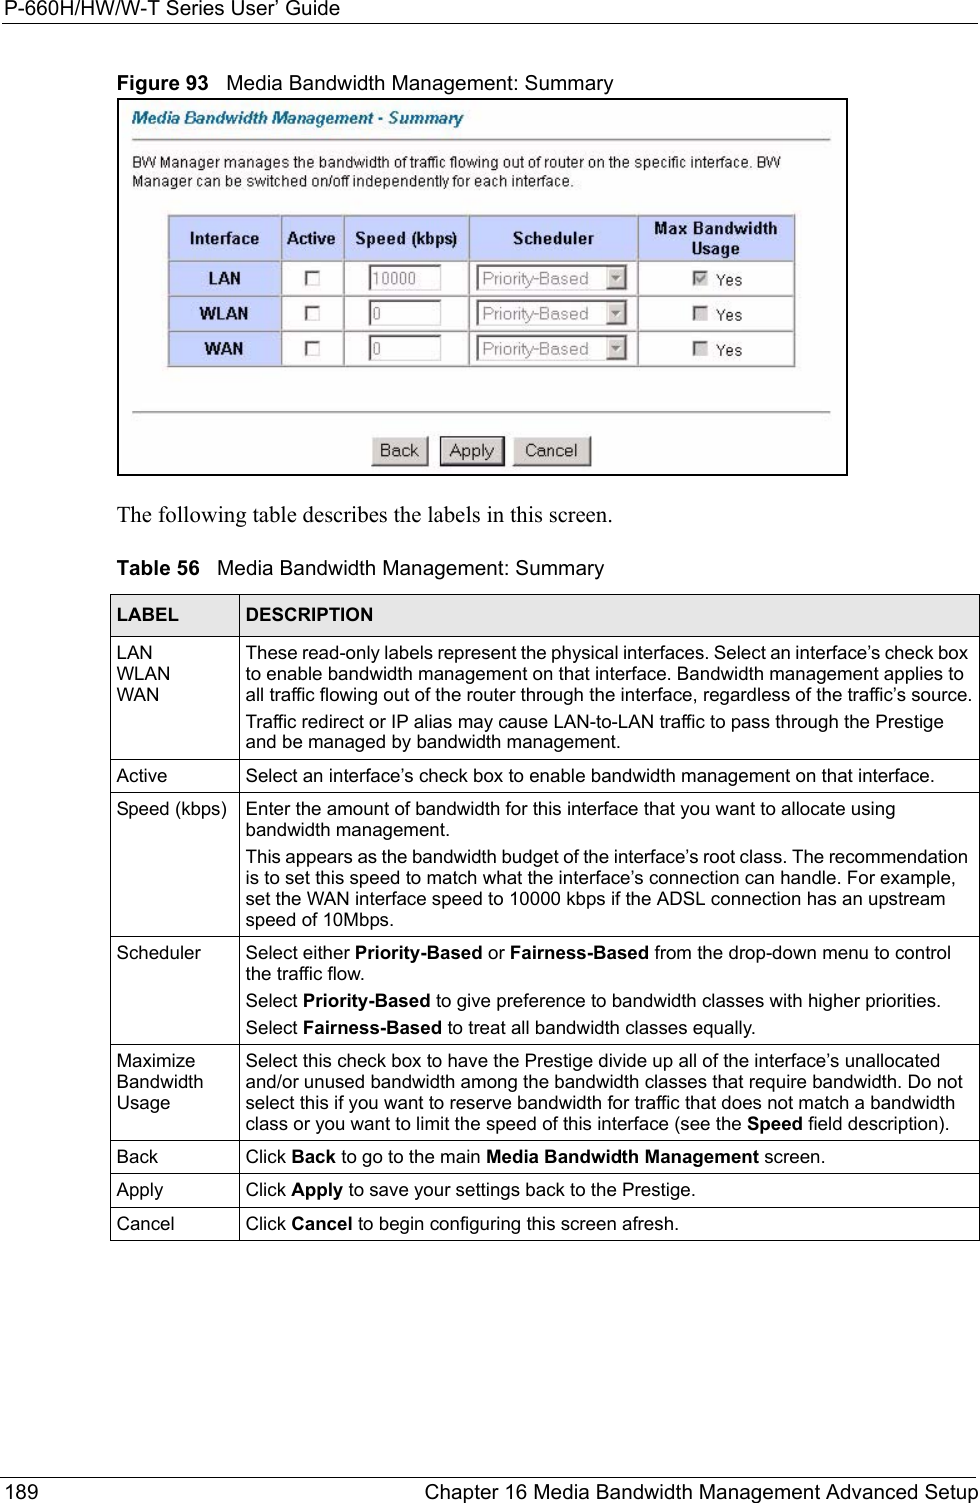 P-660H/HW/W-T Series User’ Guide189 Chapter 16 Media Bandwidth Management Advanced SetupFigure 93   Media Bandwidth Management: SummaryThe following table describes the labels in this screen. Table 56   Media Bandwidth Management: SummaryLABEL DESCRIPTIONLAN WLANWANThese read-only labels represent the physical interfaces. Select an interface’s check box to enable bandwidth management on that interface. Bandwidth management applies to all traffic flowing out of the router through the interface, regardless of the traffic’s source.Traffic redirect or IP alias may cause LAN-to-LAN traffic to pass through the Prestige and be managed by bandwidth management.Active Select an interface’s check box to enable bandwidth management on that interface. Speed (kbps) Enter the amount of bandwidth for this interface that you want to allocate using bandwidth management. This appears as the bandwidth budget of the interface’s root class. The recommendation is to set this speed to match what the interface’s connection can handle. For example, set the WAN interface speed to 10000 kbps if the ADSL connection has an upstream speed of 10Mbps.Scheduler Select either Priority-Based or Fairness-Based from the drop-down menu to control the traffic flow. Select Priority-Based to give preference to bandwidth classes with higher priorities. Select Fairness-Based to treat all bandwidth classes equally.Maximize Bandwidth UsageSelect this check box to have the Prestige divide up all of the interface’s unallocated and/or unused bandwidth among the bandwidth classes that require bandwidth. Do not select this if you want to reserve bandwidth for traffic that does not match a bandwidth class or you want to limit the speed of this interface (see the Speed field description).Back Click Back to go to the main Media Bandwidth Management screen.Apply Click Apply to save your settings back to the Prestige.Cancel Click Cancel to begin configuring this screen afresh.